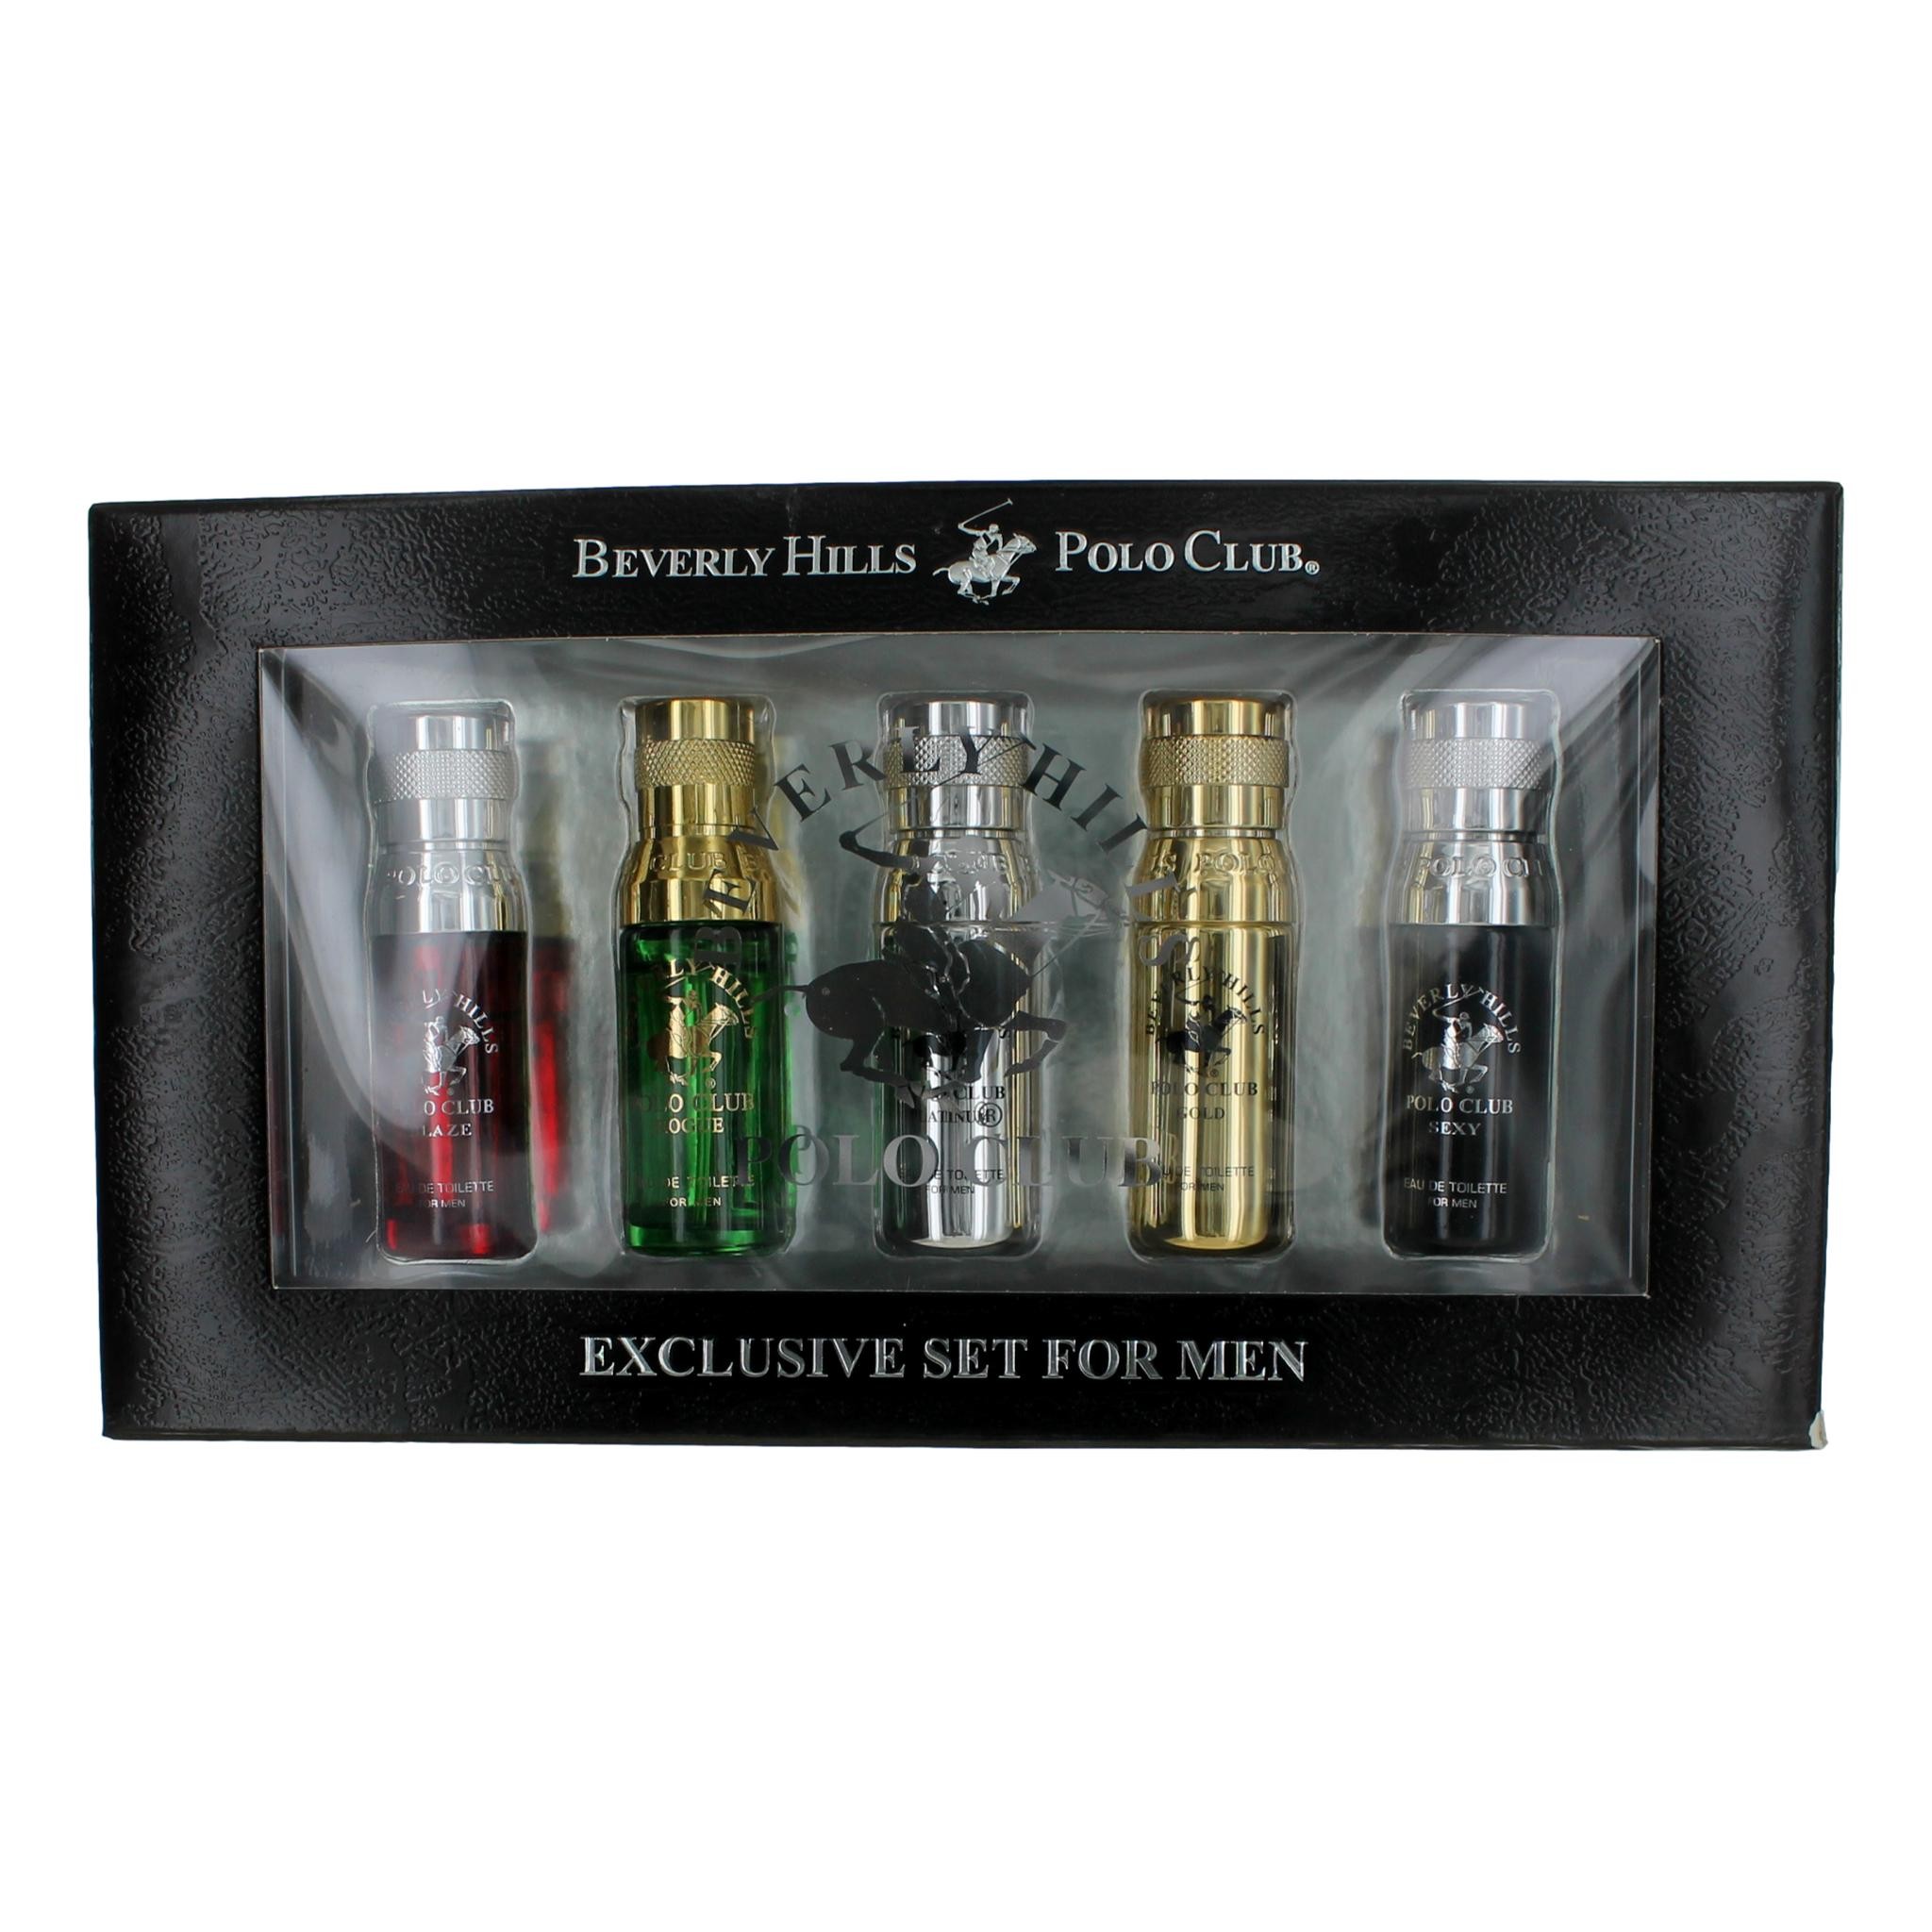 BHPC Exclusive Set by Beverly Hills Polo Club 5 Piece Variety Set Men (with Gold Bottle)